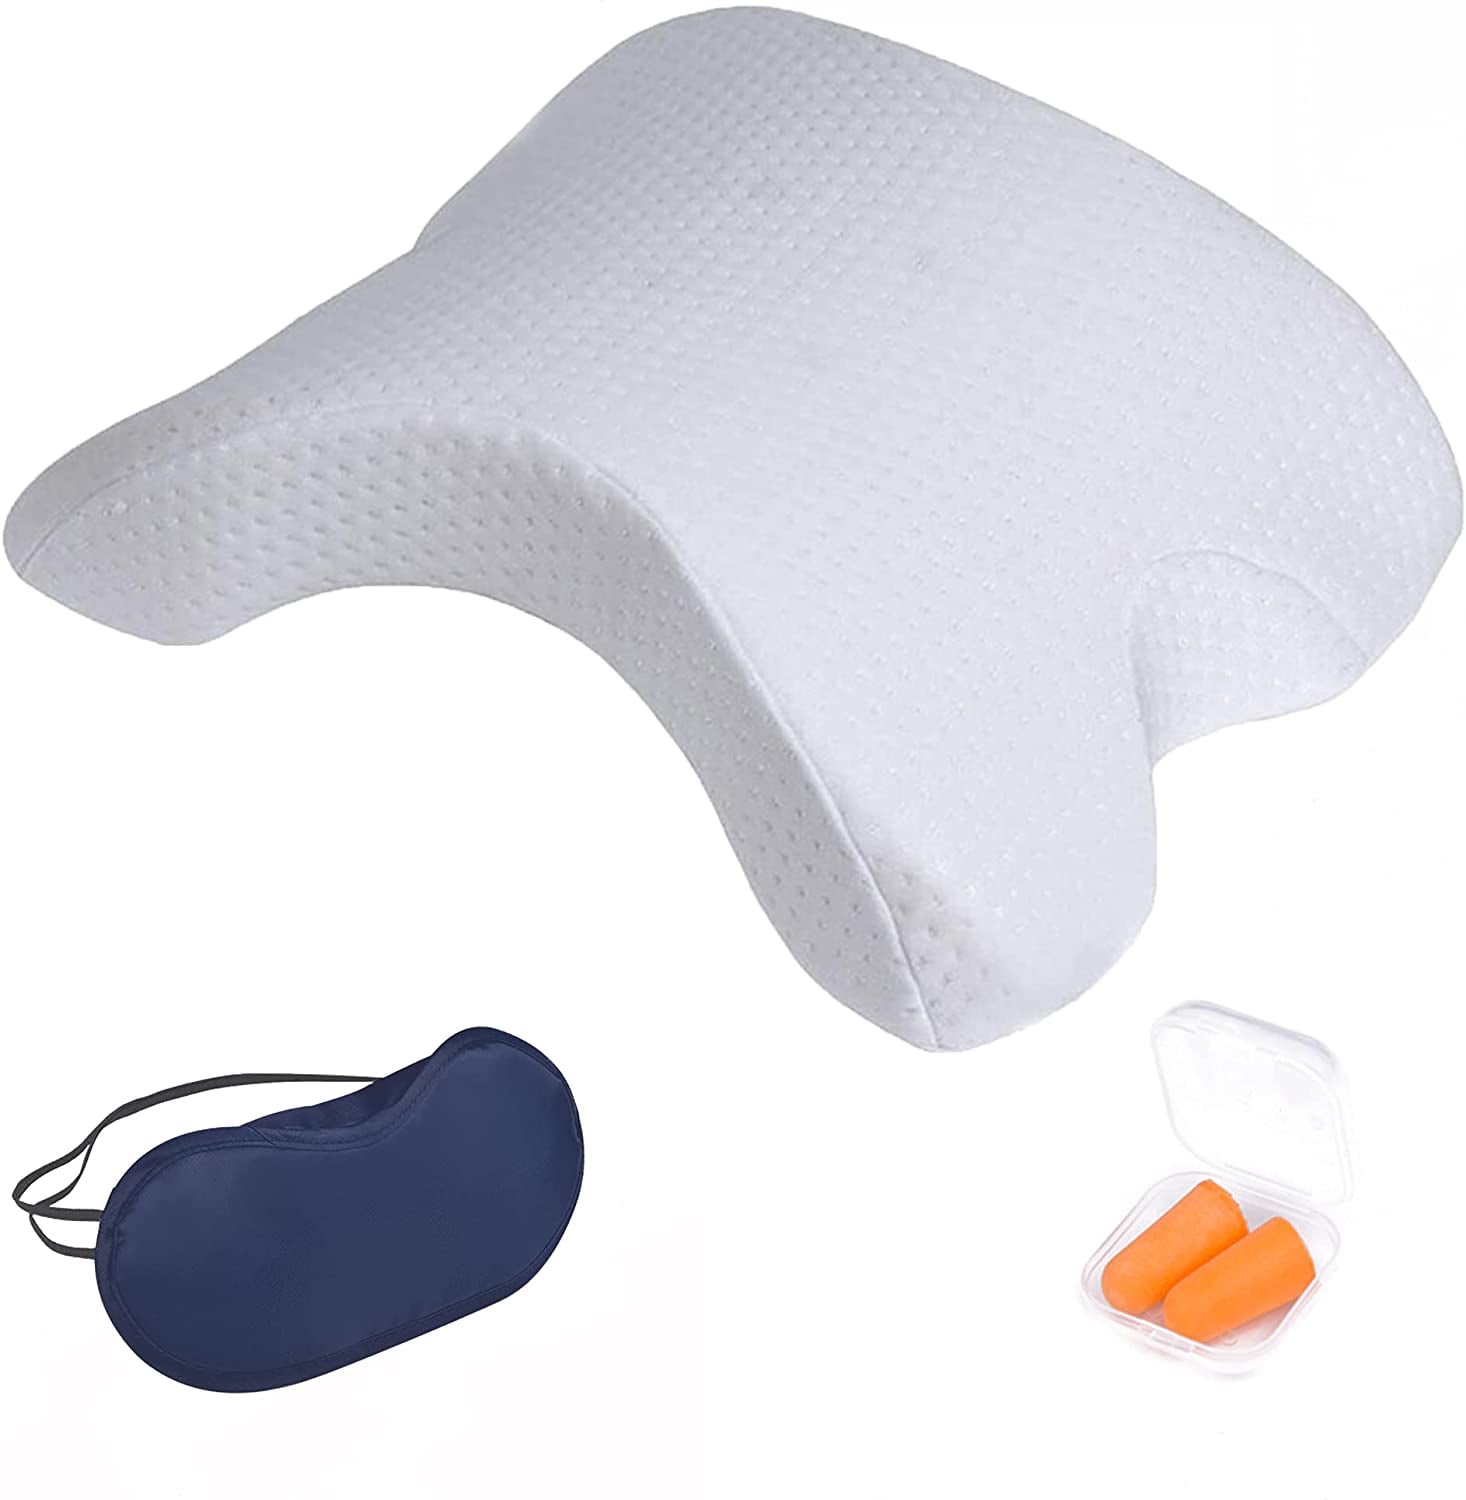 Details about   Memory Foam Couple Pillow Multifunctional Slow Rebound Comfortable Neck Support 